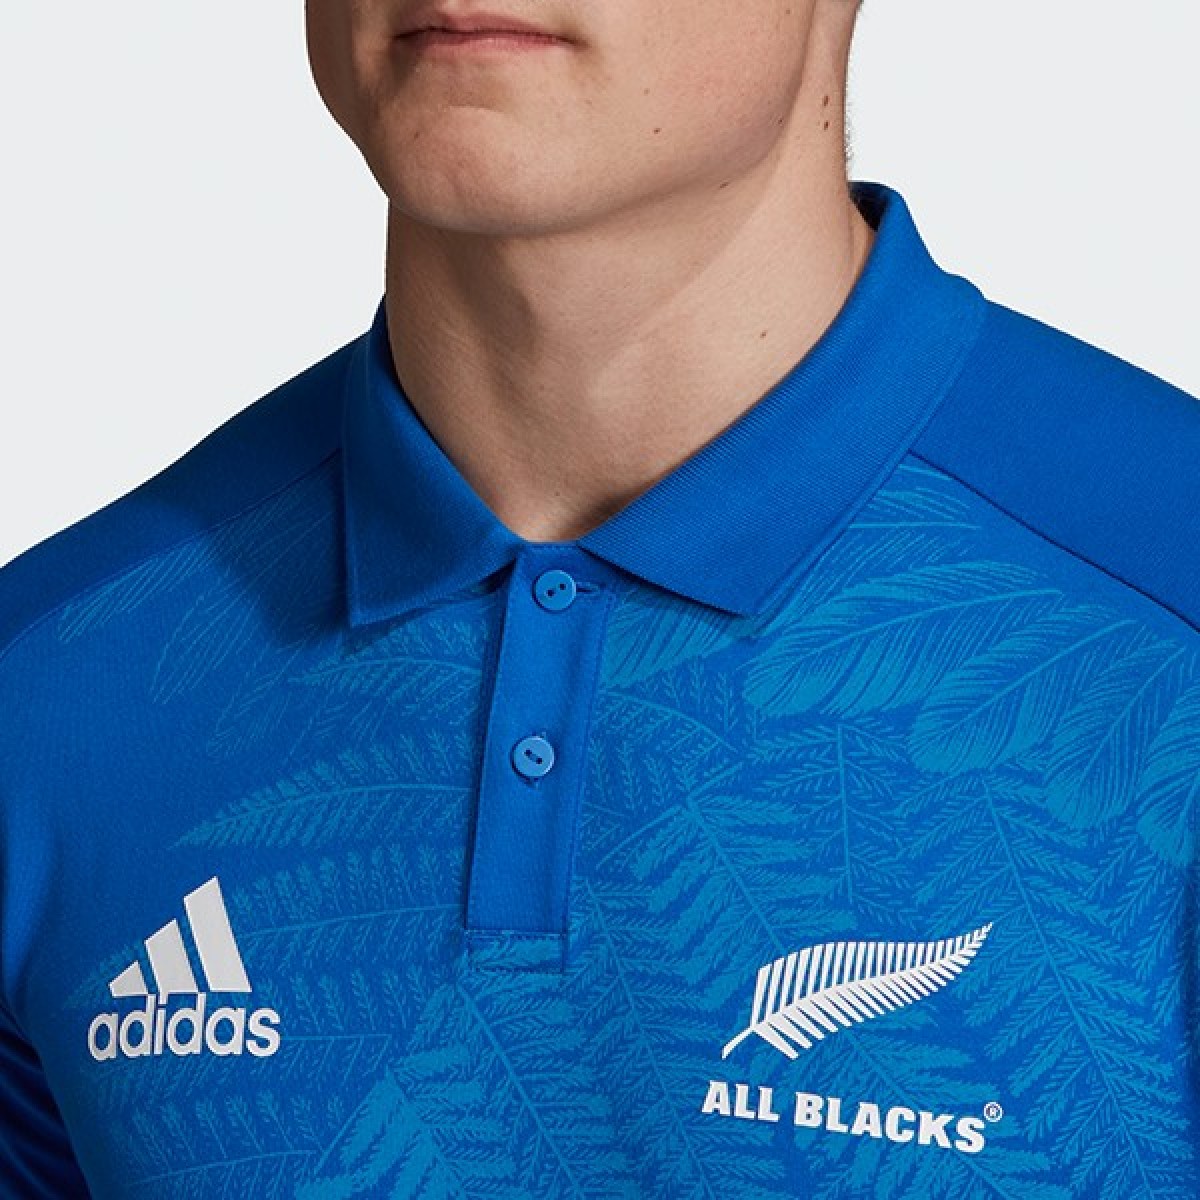 New Zealand All Blacks RUGBY 2019/2020 home away training polo jersey S-3XL 